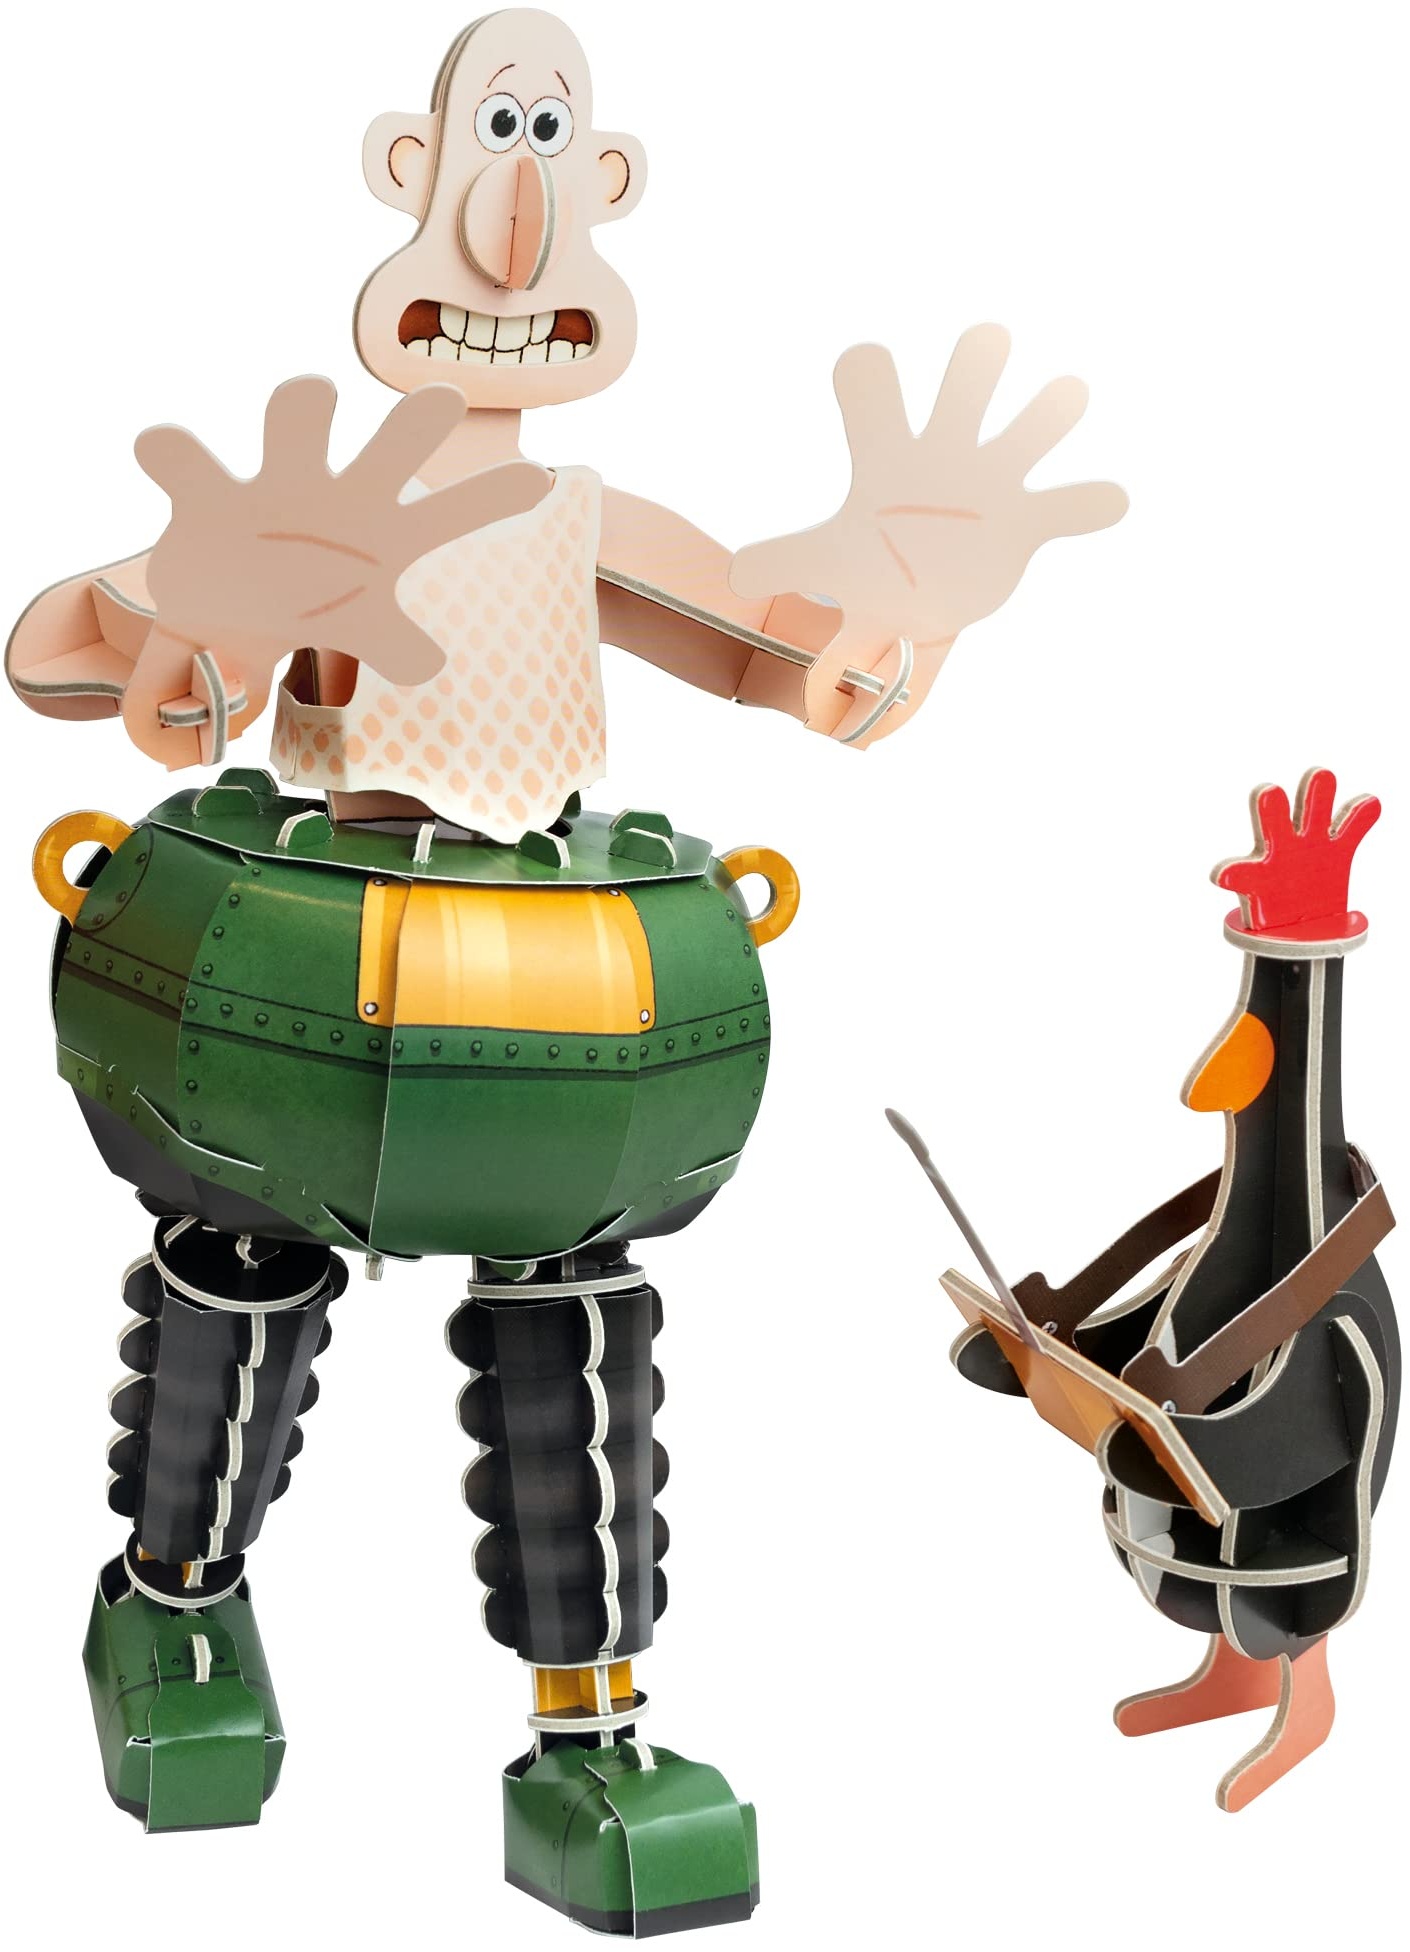 Build Your Own Wallace & Gromit Techno Trousers I Wrong Trousers I Includes Feathers McGraw | 76 Pieces I Fun Gift for Kids, Girls & Boys & Families Age 8+ | Eco Friendly Cardboard Slot Together Kit